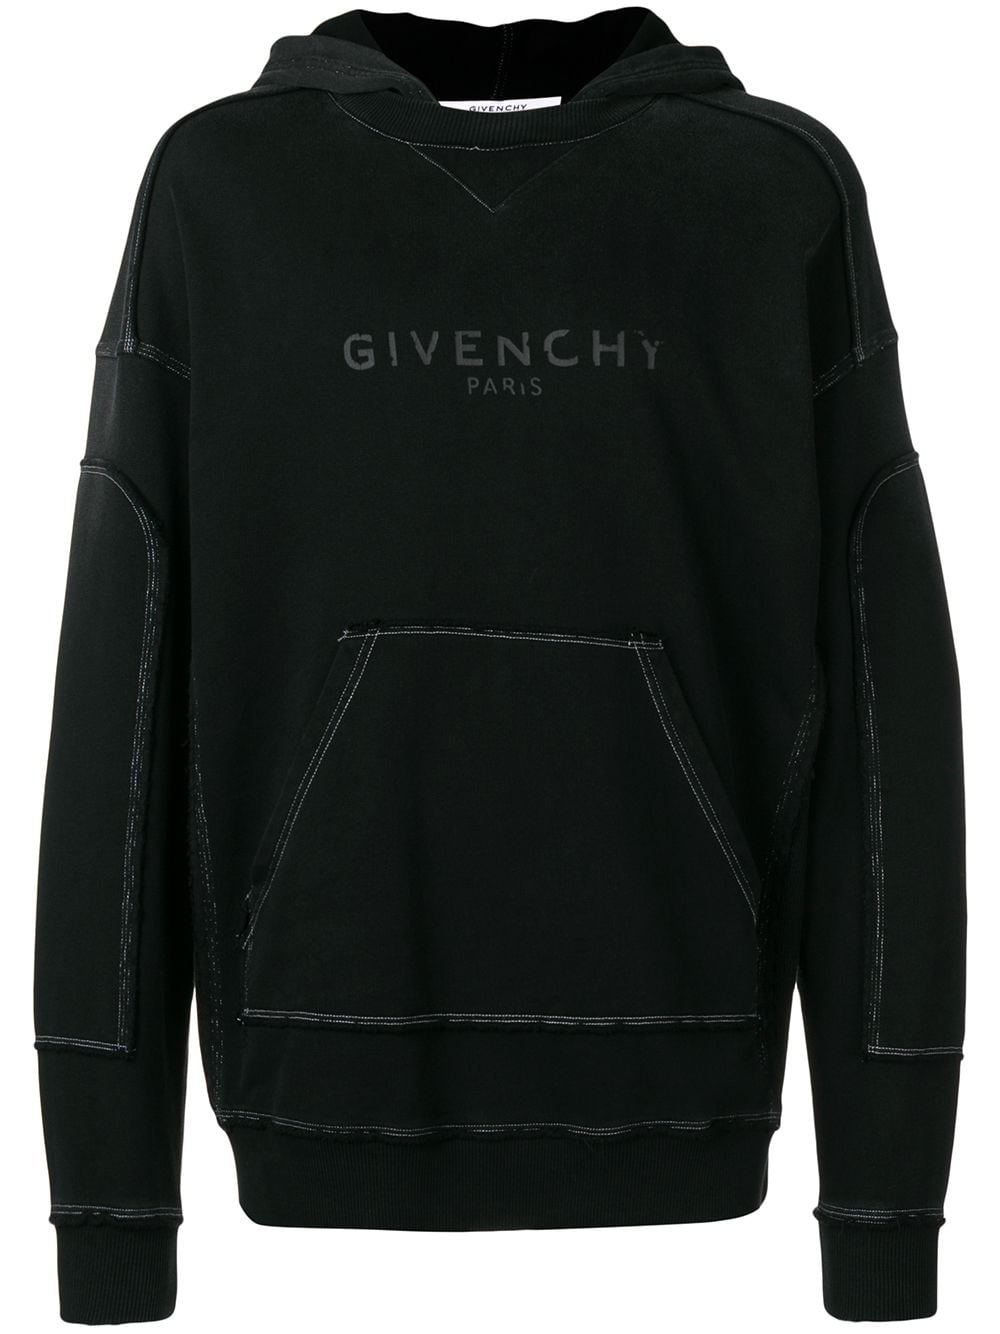 GIVENCHY GIVENCHY BLURRED GIVENCHY DISTRESSED HOODIE - BLACK,BM708P300312974065